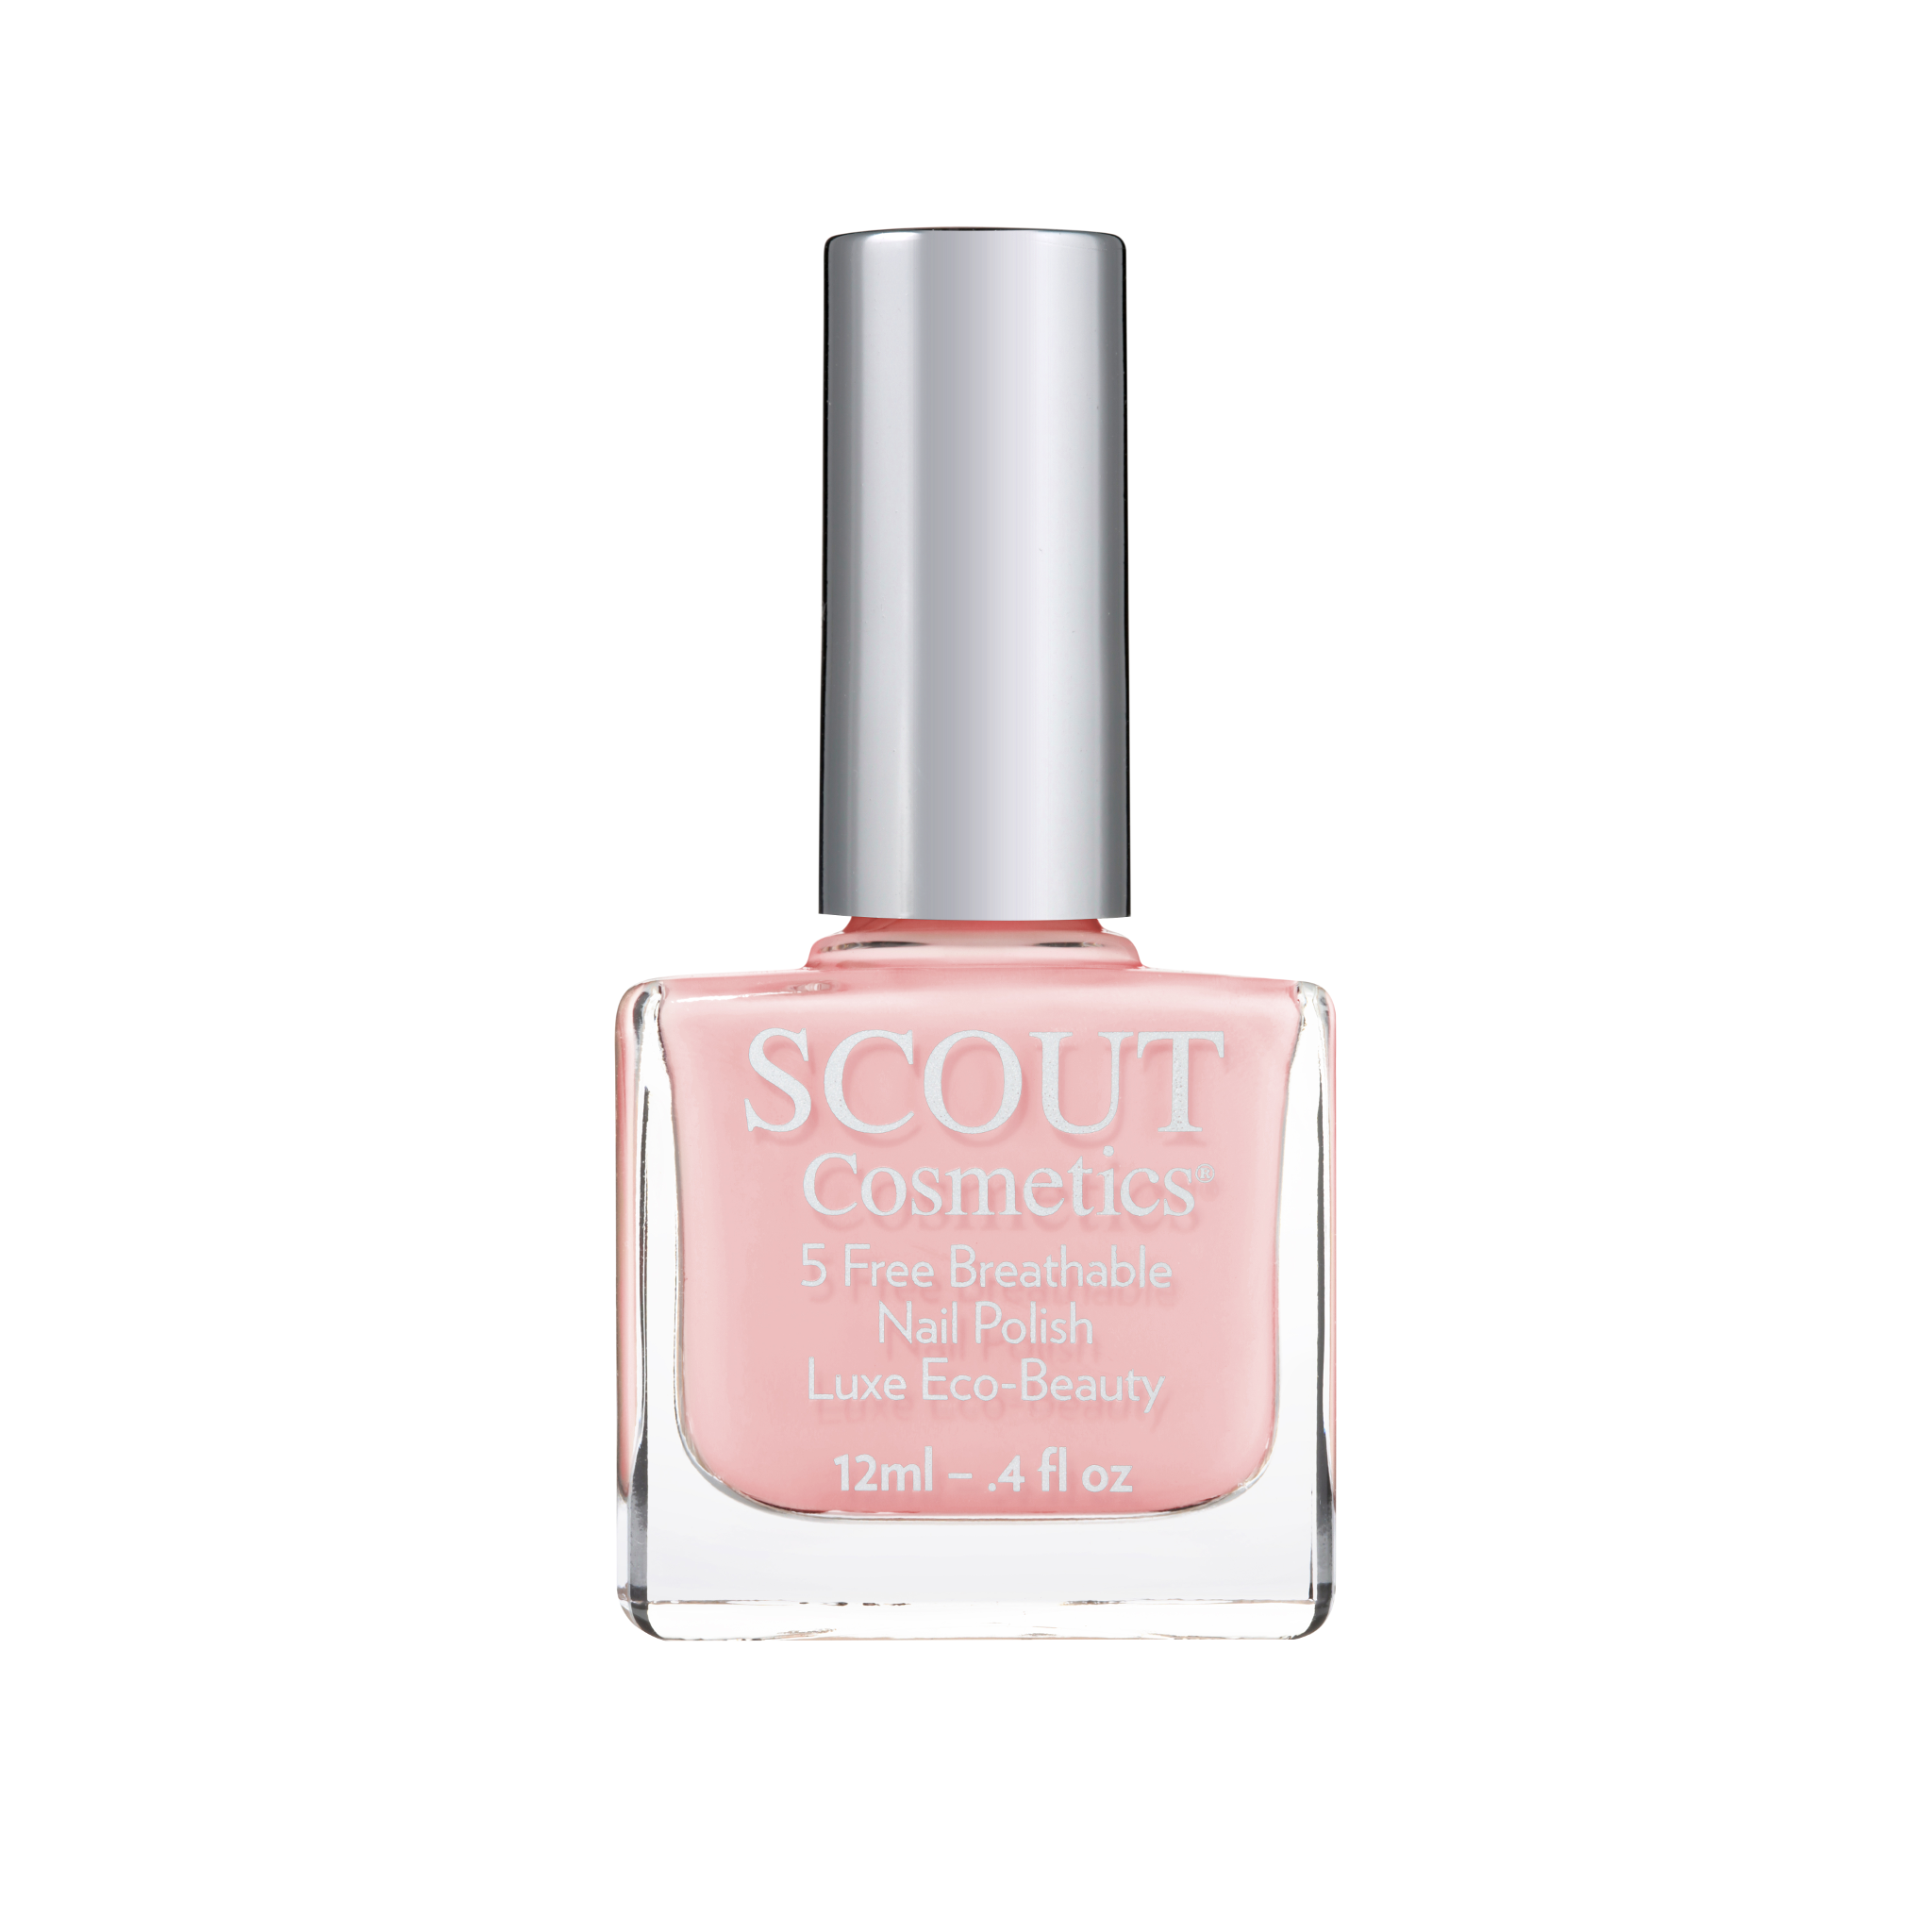 Buy Scout Breathable Super Food Infused Nail Polish - Fancy